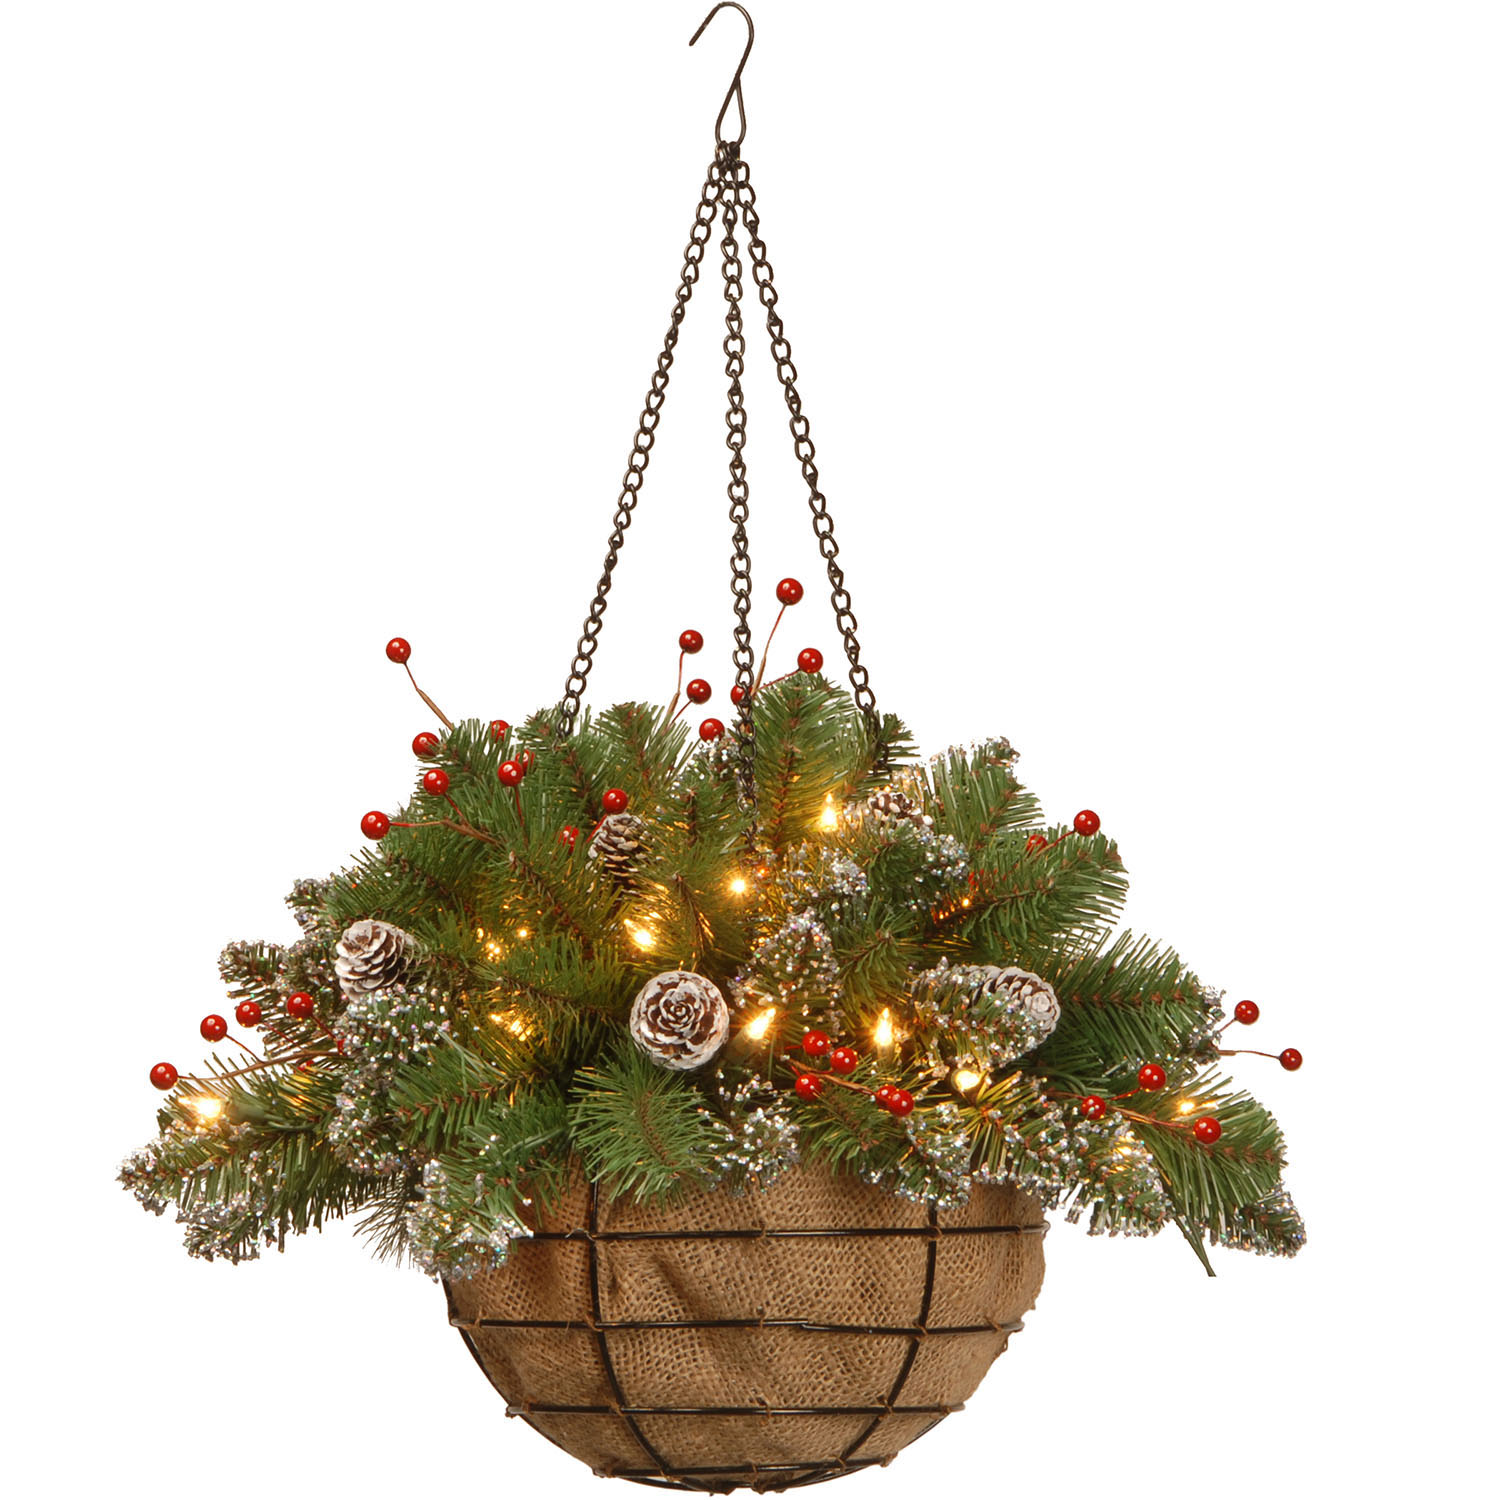 20 Inch Glittery Mountain Spruce Hanging Basket: Battery Operated Leds